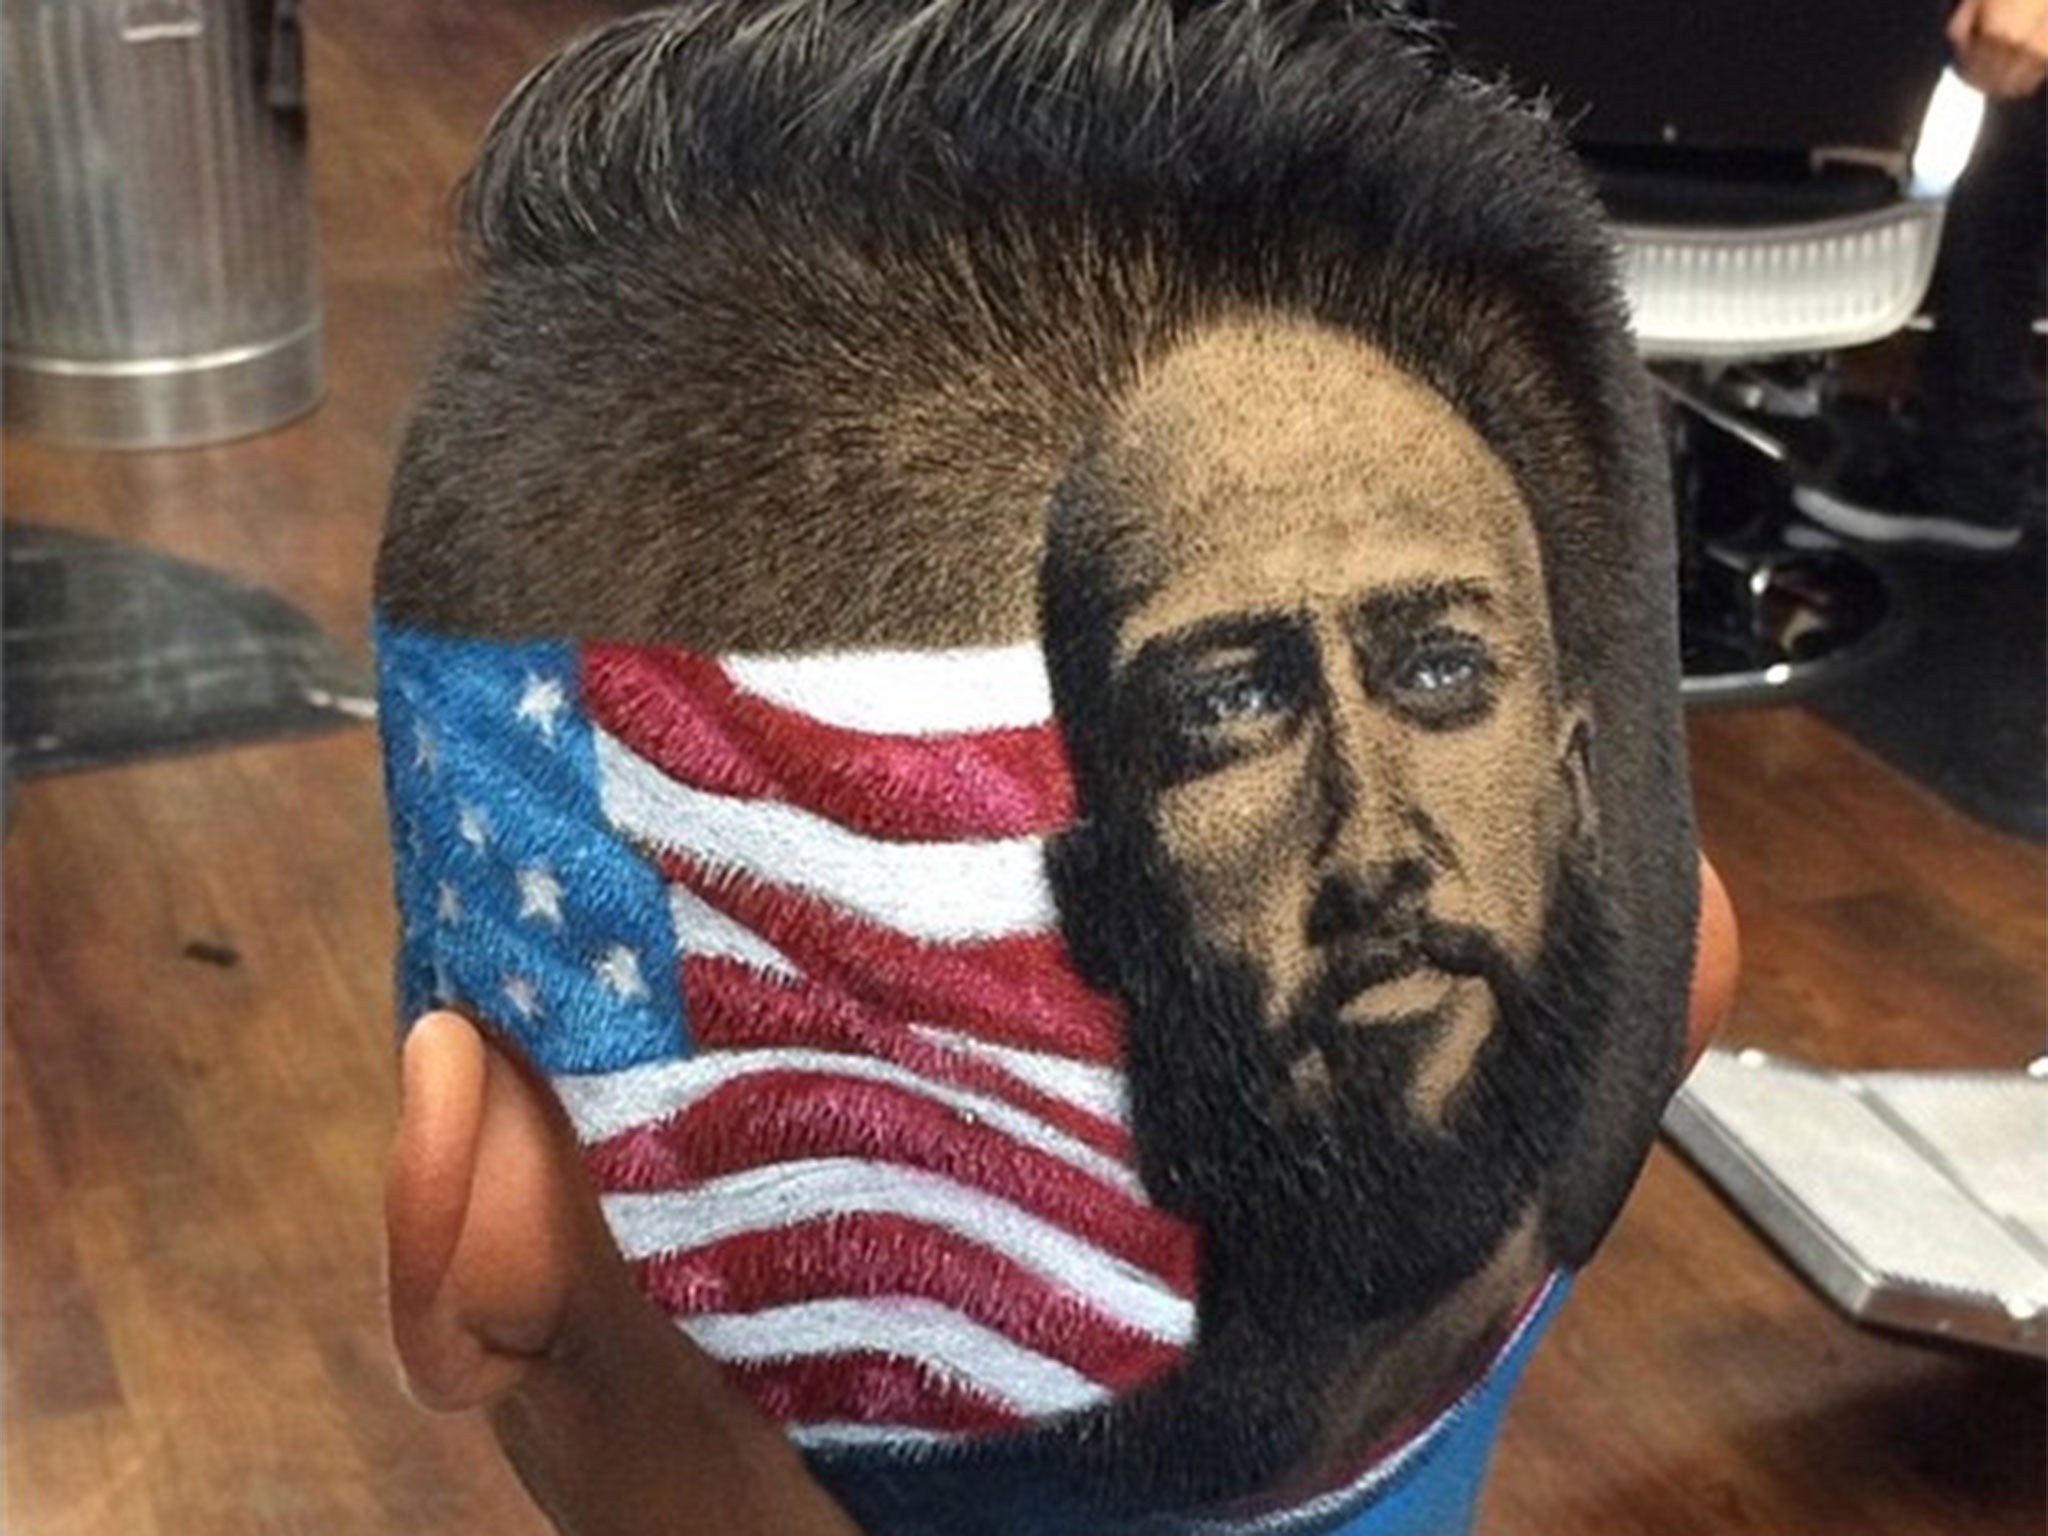 A barber in Texas has been creating brilliant images in the back of fans' heads